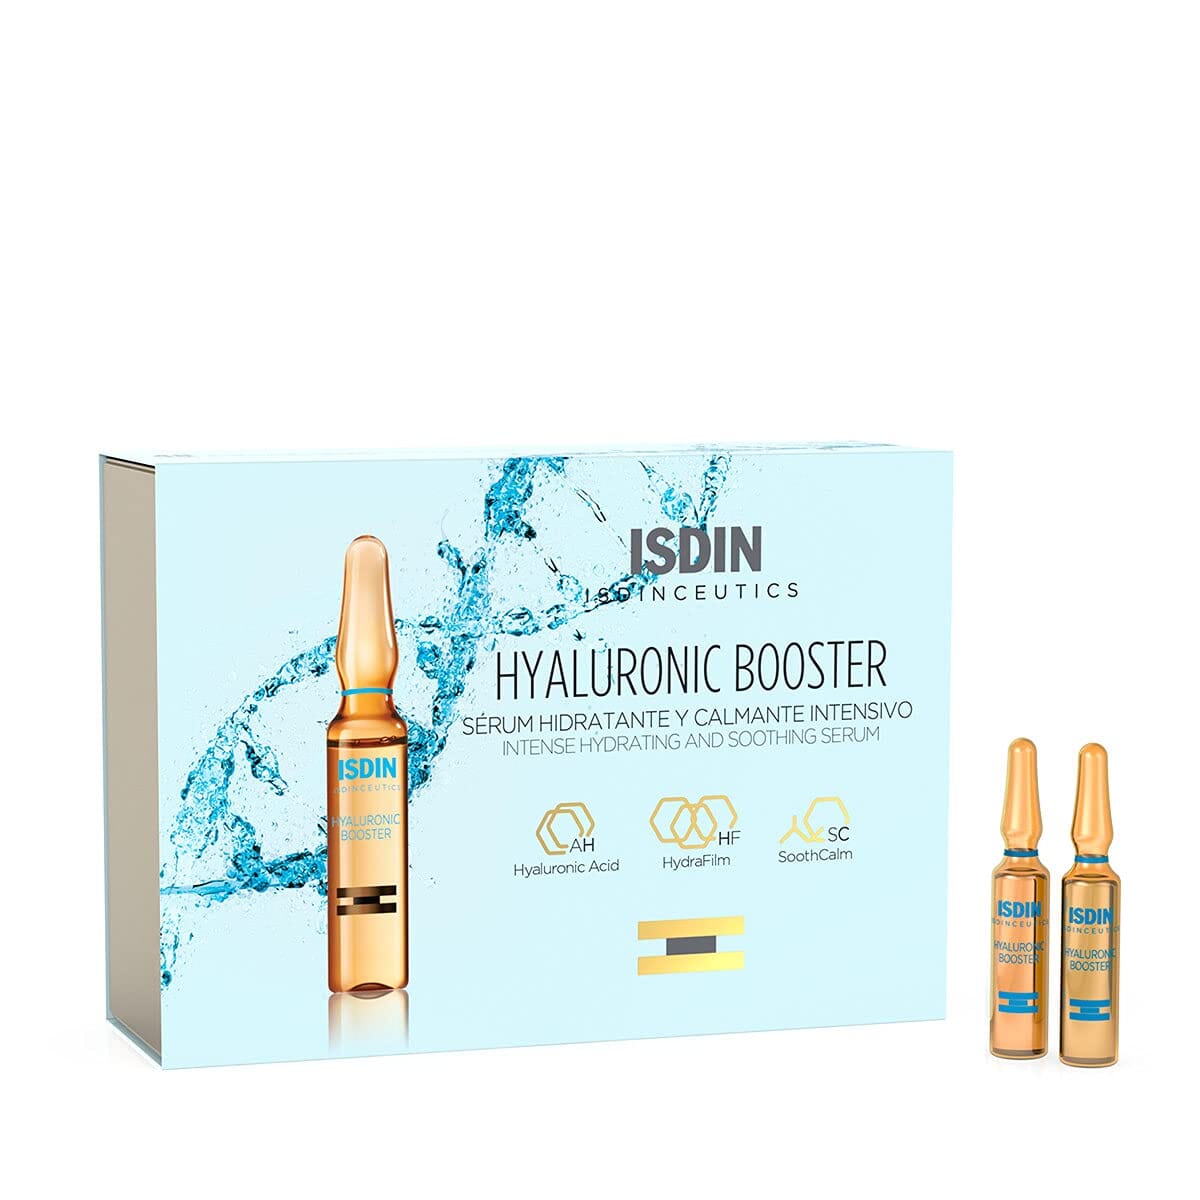 ISDIN Hyaluronic Booster 30 Ampoules ISDIN 2ml x 30 ampoules Shop at Exclusive Beauty Club